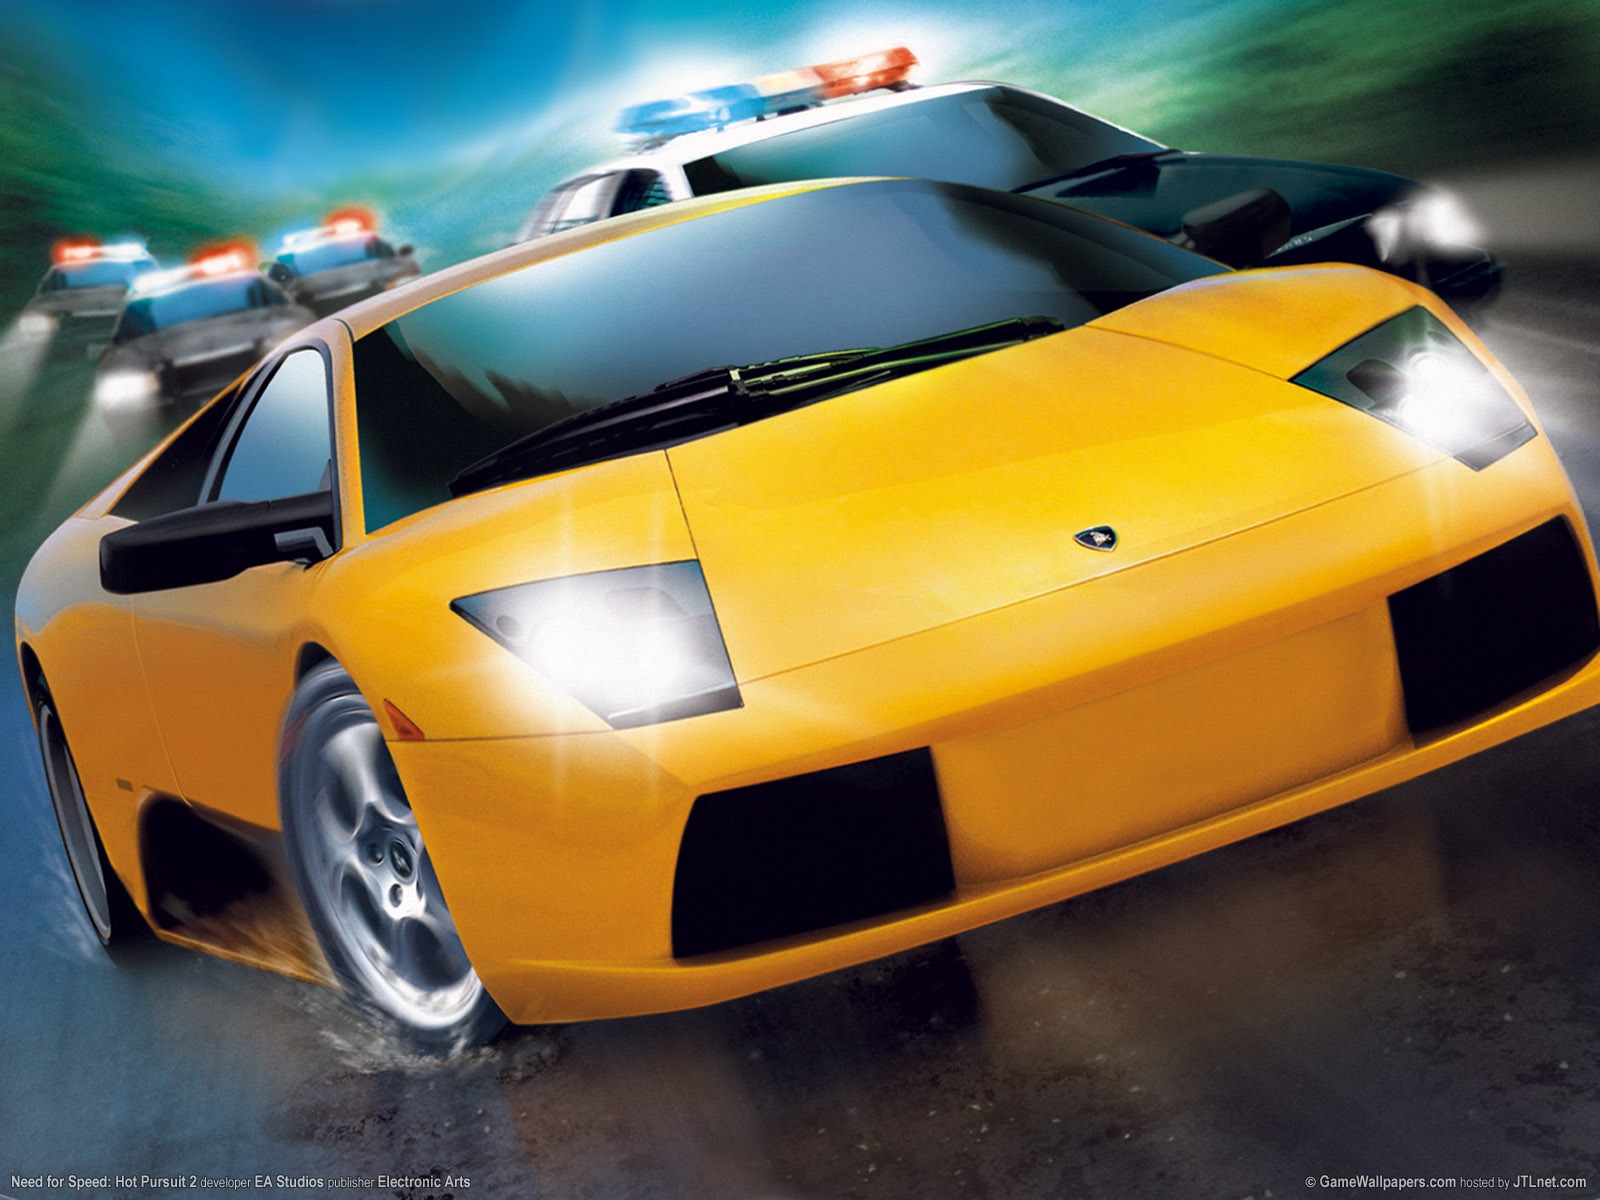 Need for Speed: Hot Pursuit 极品飞车14：热力追踪8 - 1600x1200